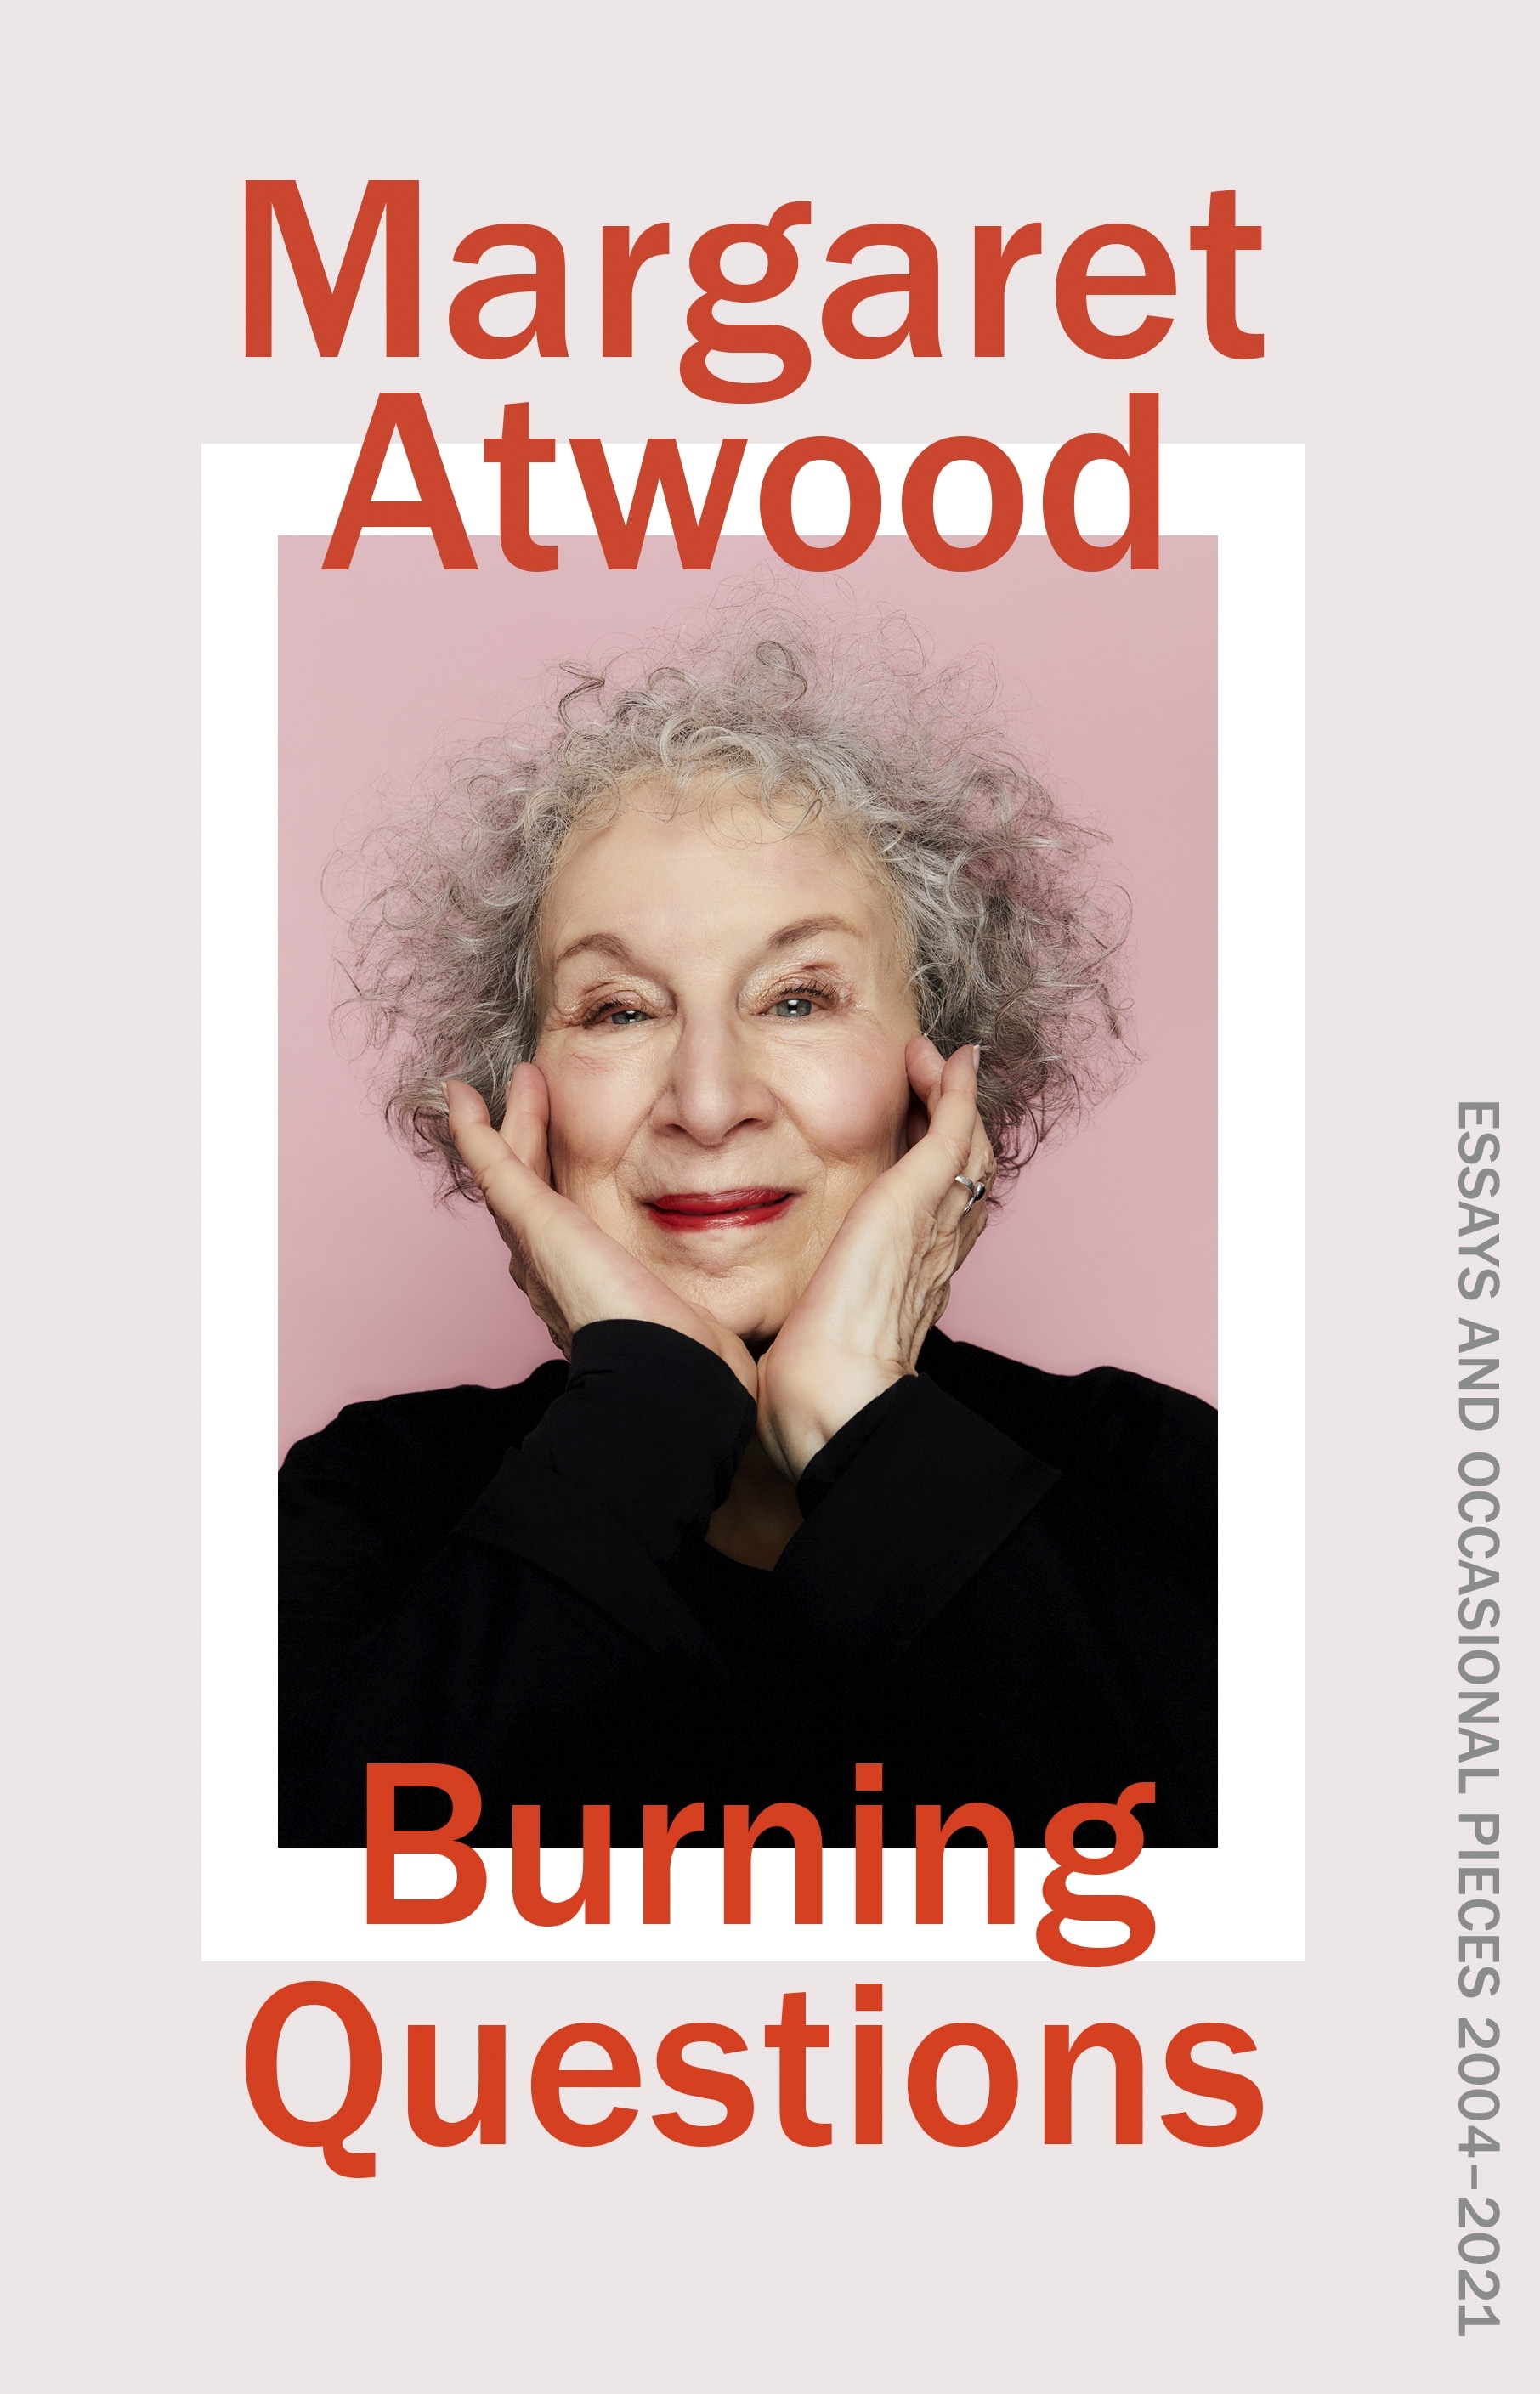 Book “Burning Questions” by Margaret Atwood — March 1, 2022